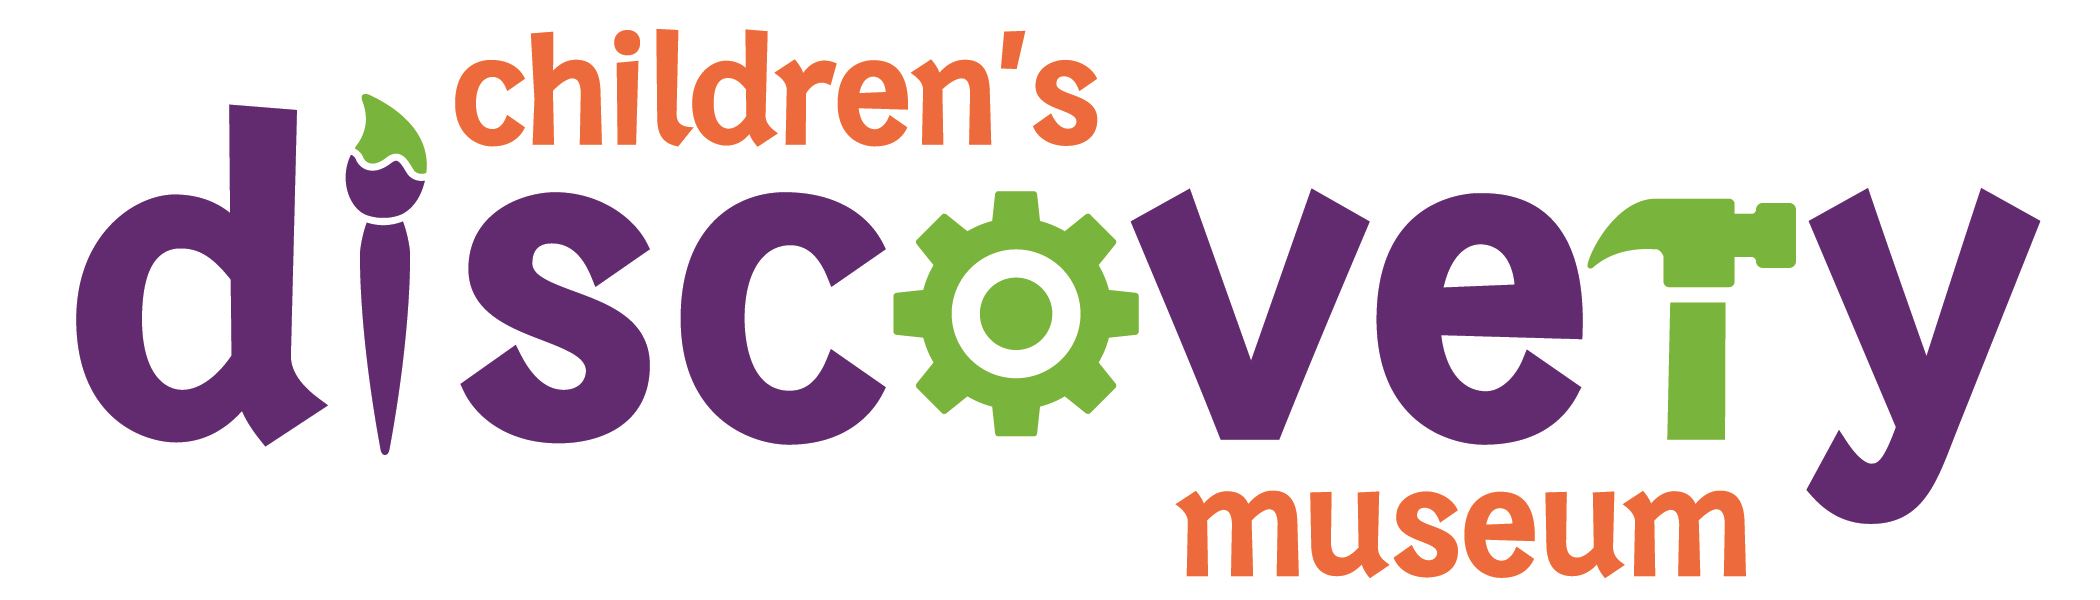 Children's Discovery Museum logo